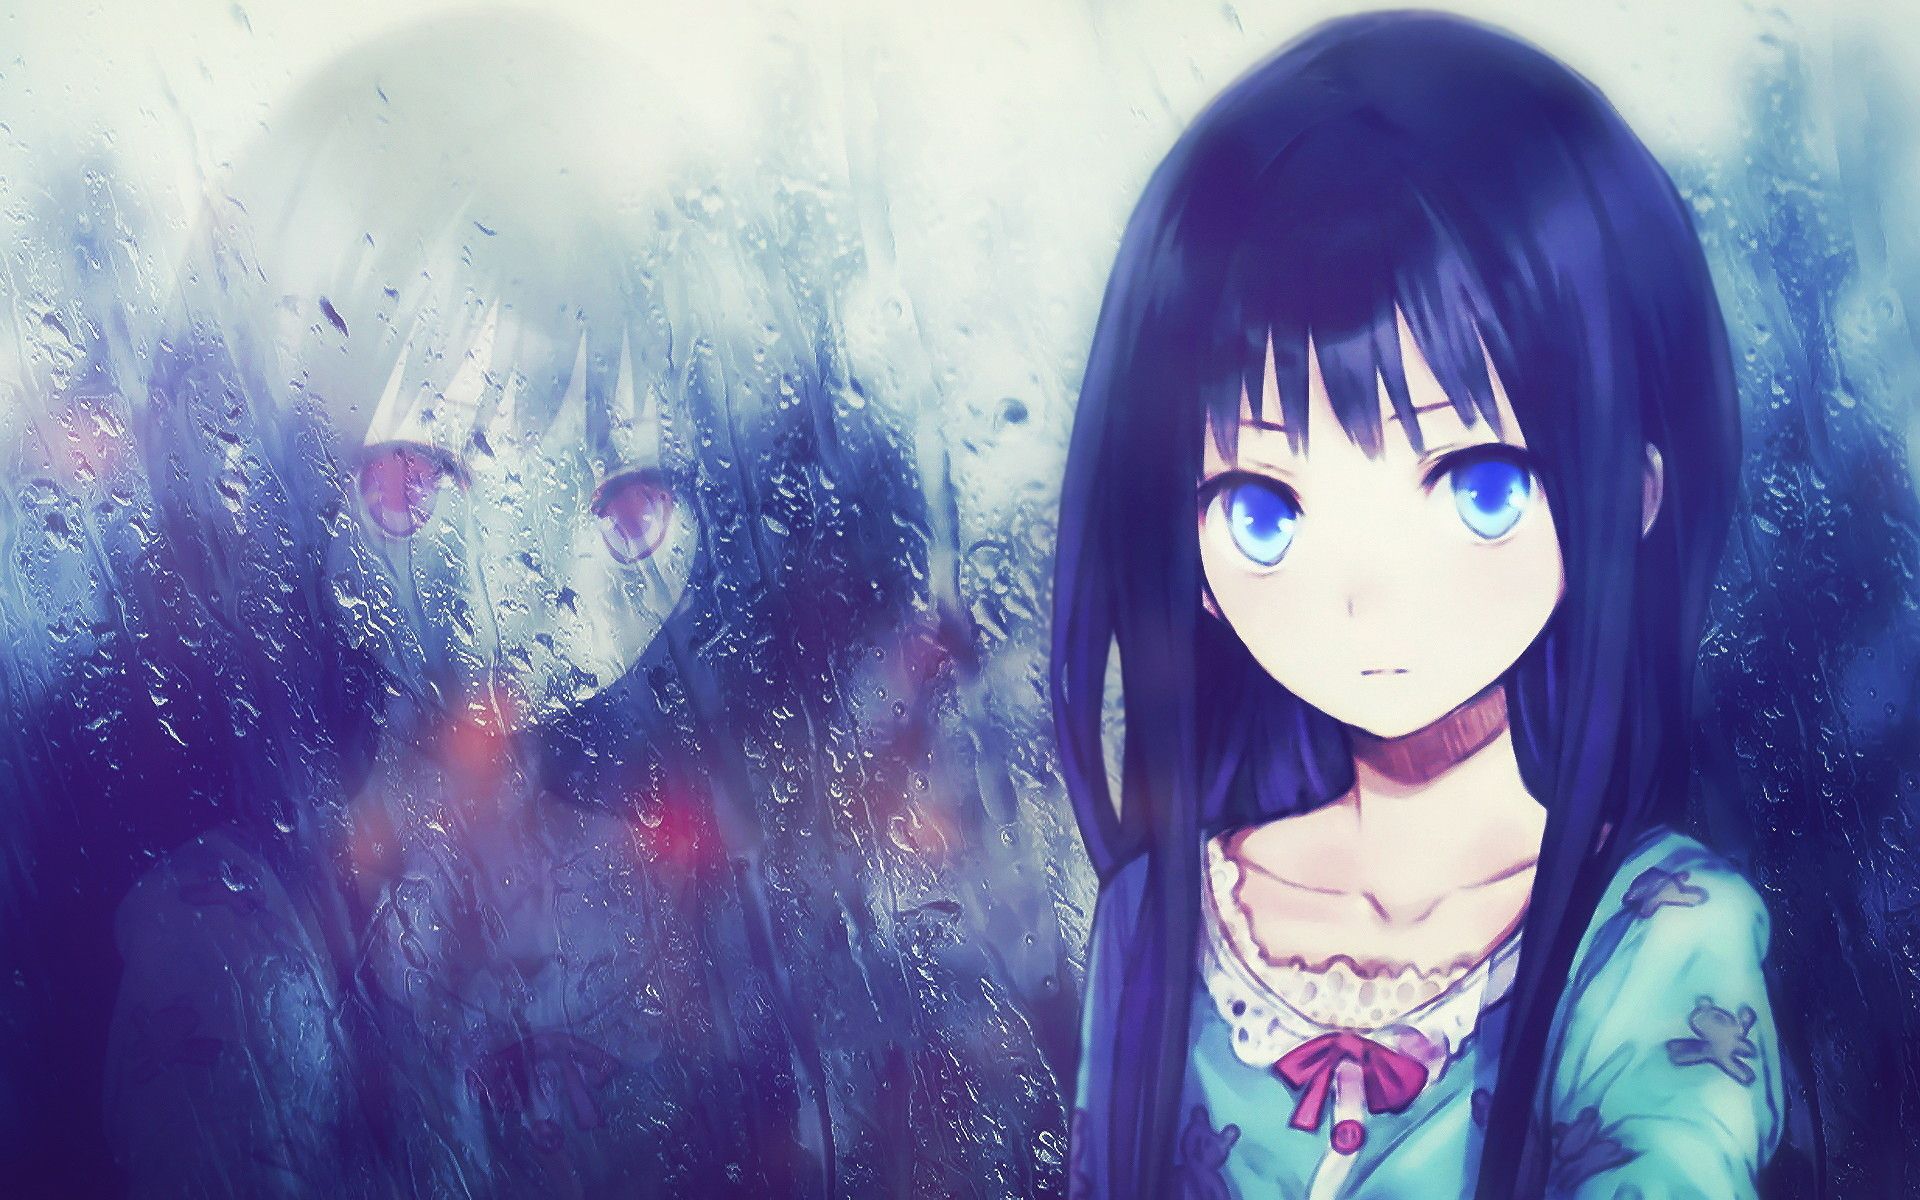 Angry Aesthetic Anime Girl Wallpapers - Wallpaper Cave